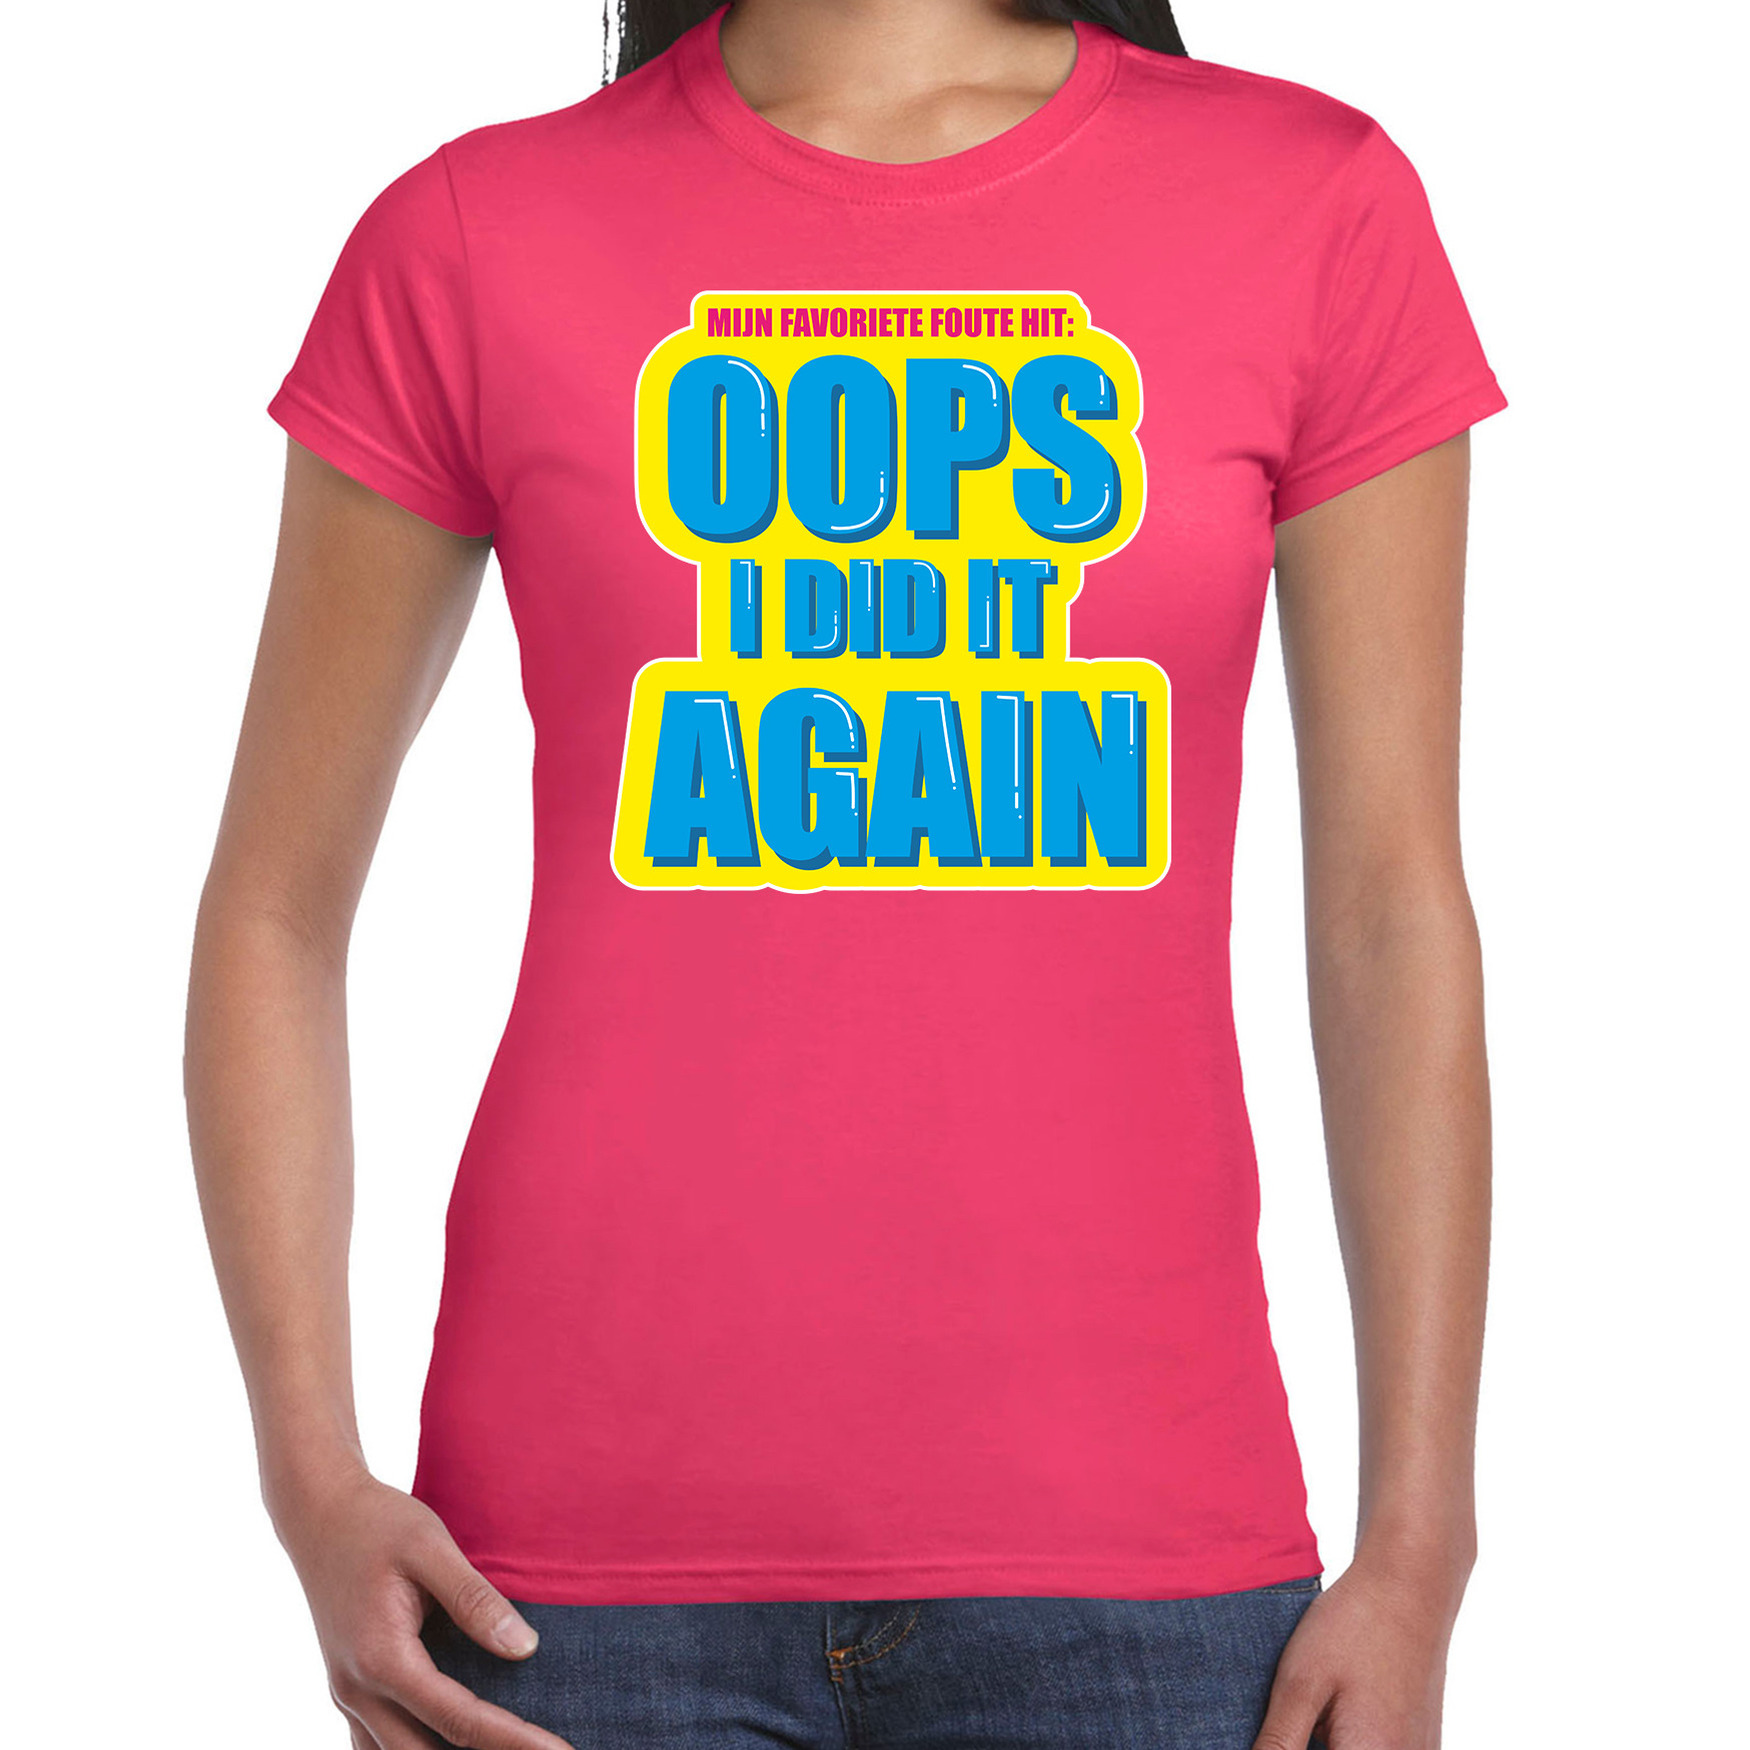 Foute party Oops I did it again verkleed t-shirt roze dames - Foute party hits outfit/ kleding